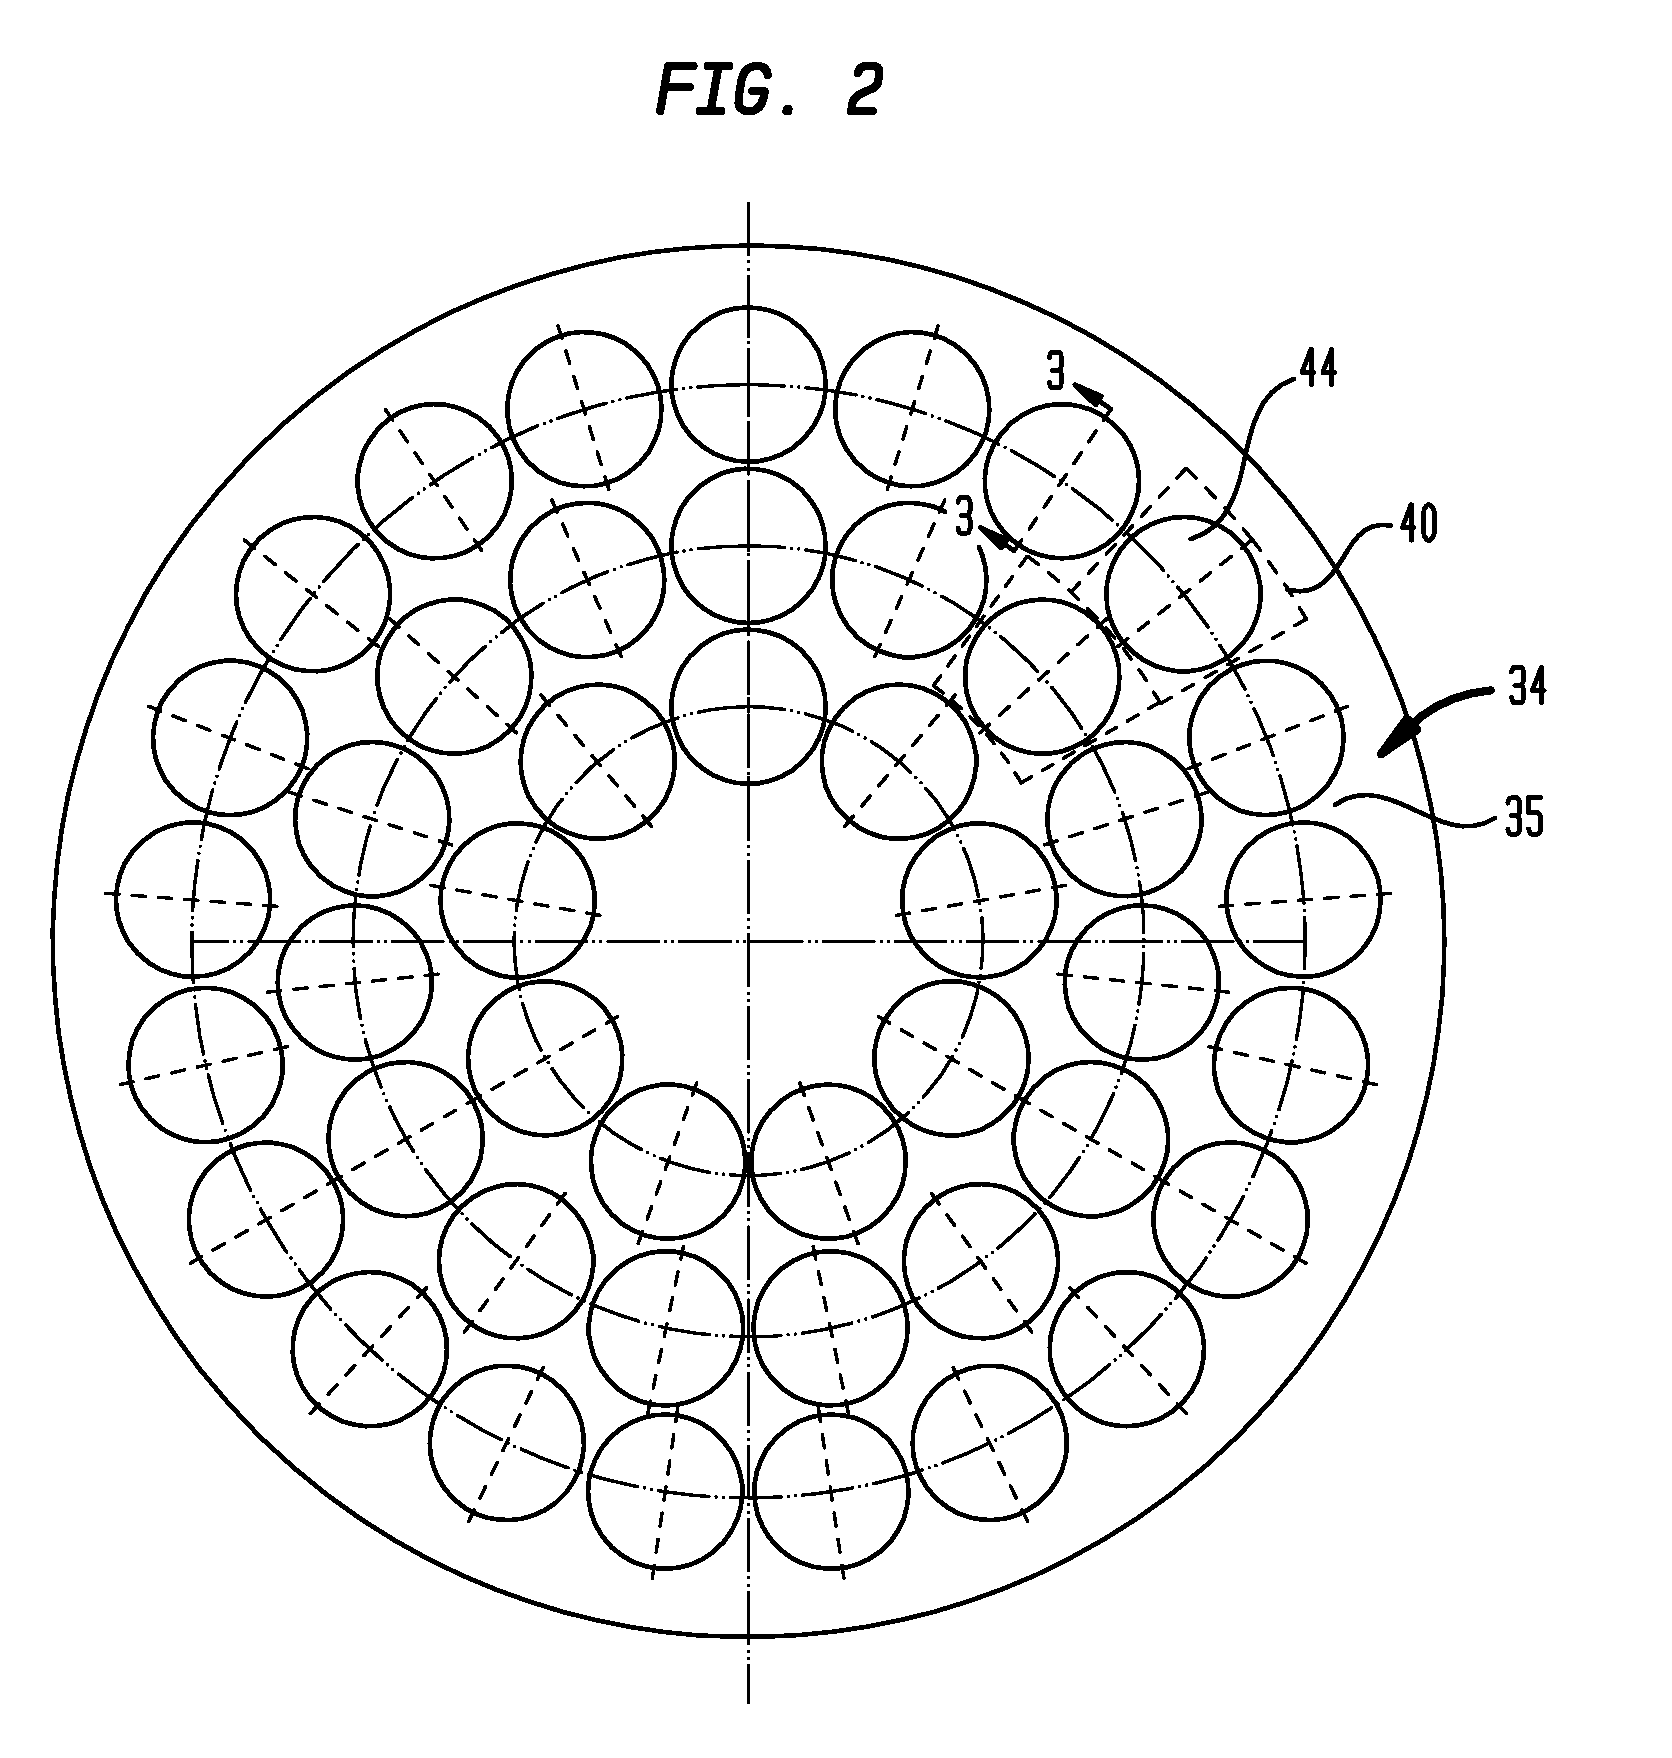 Wafer carrier with varying thermal resistance